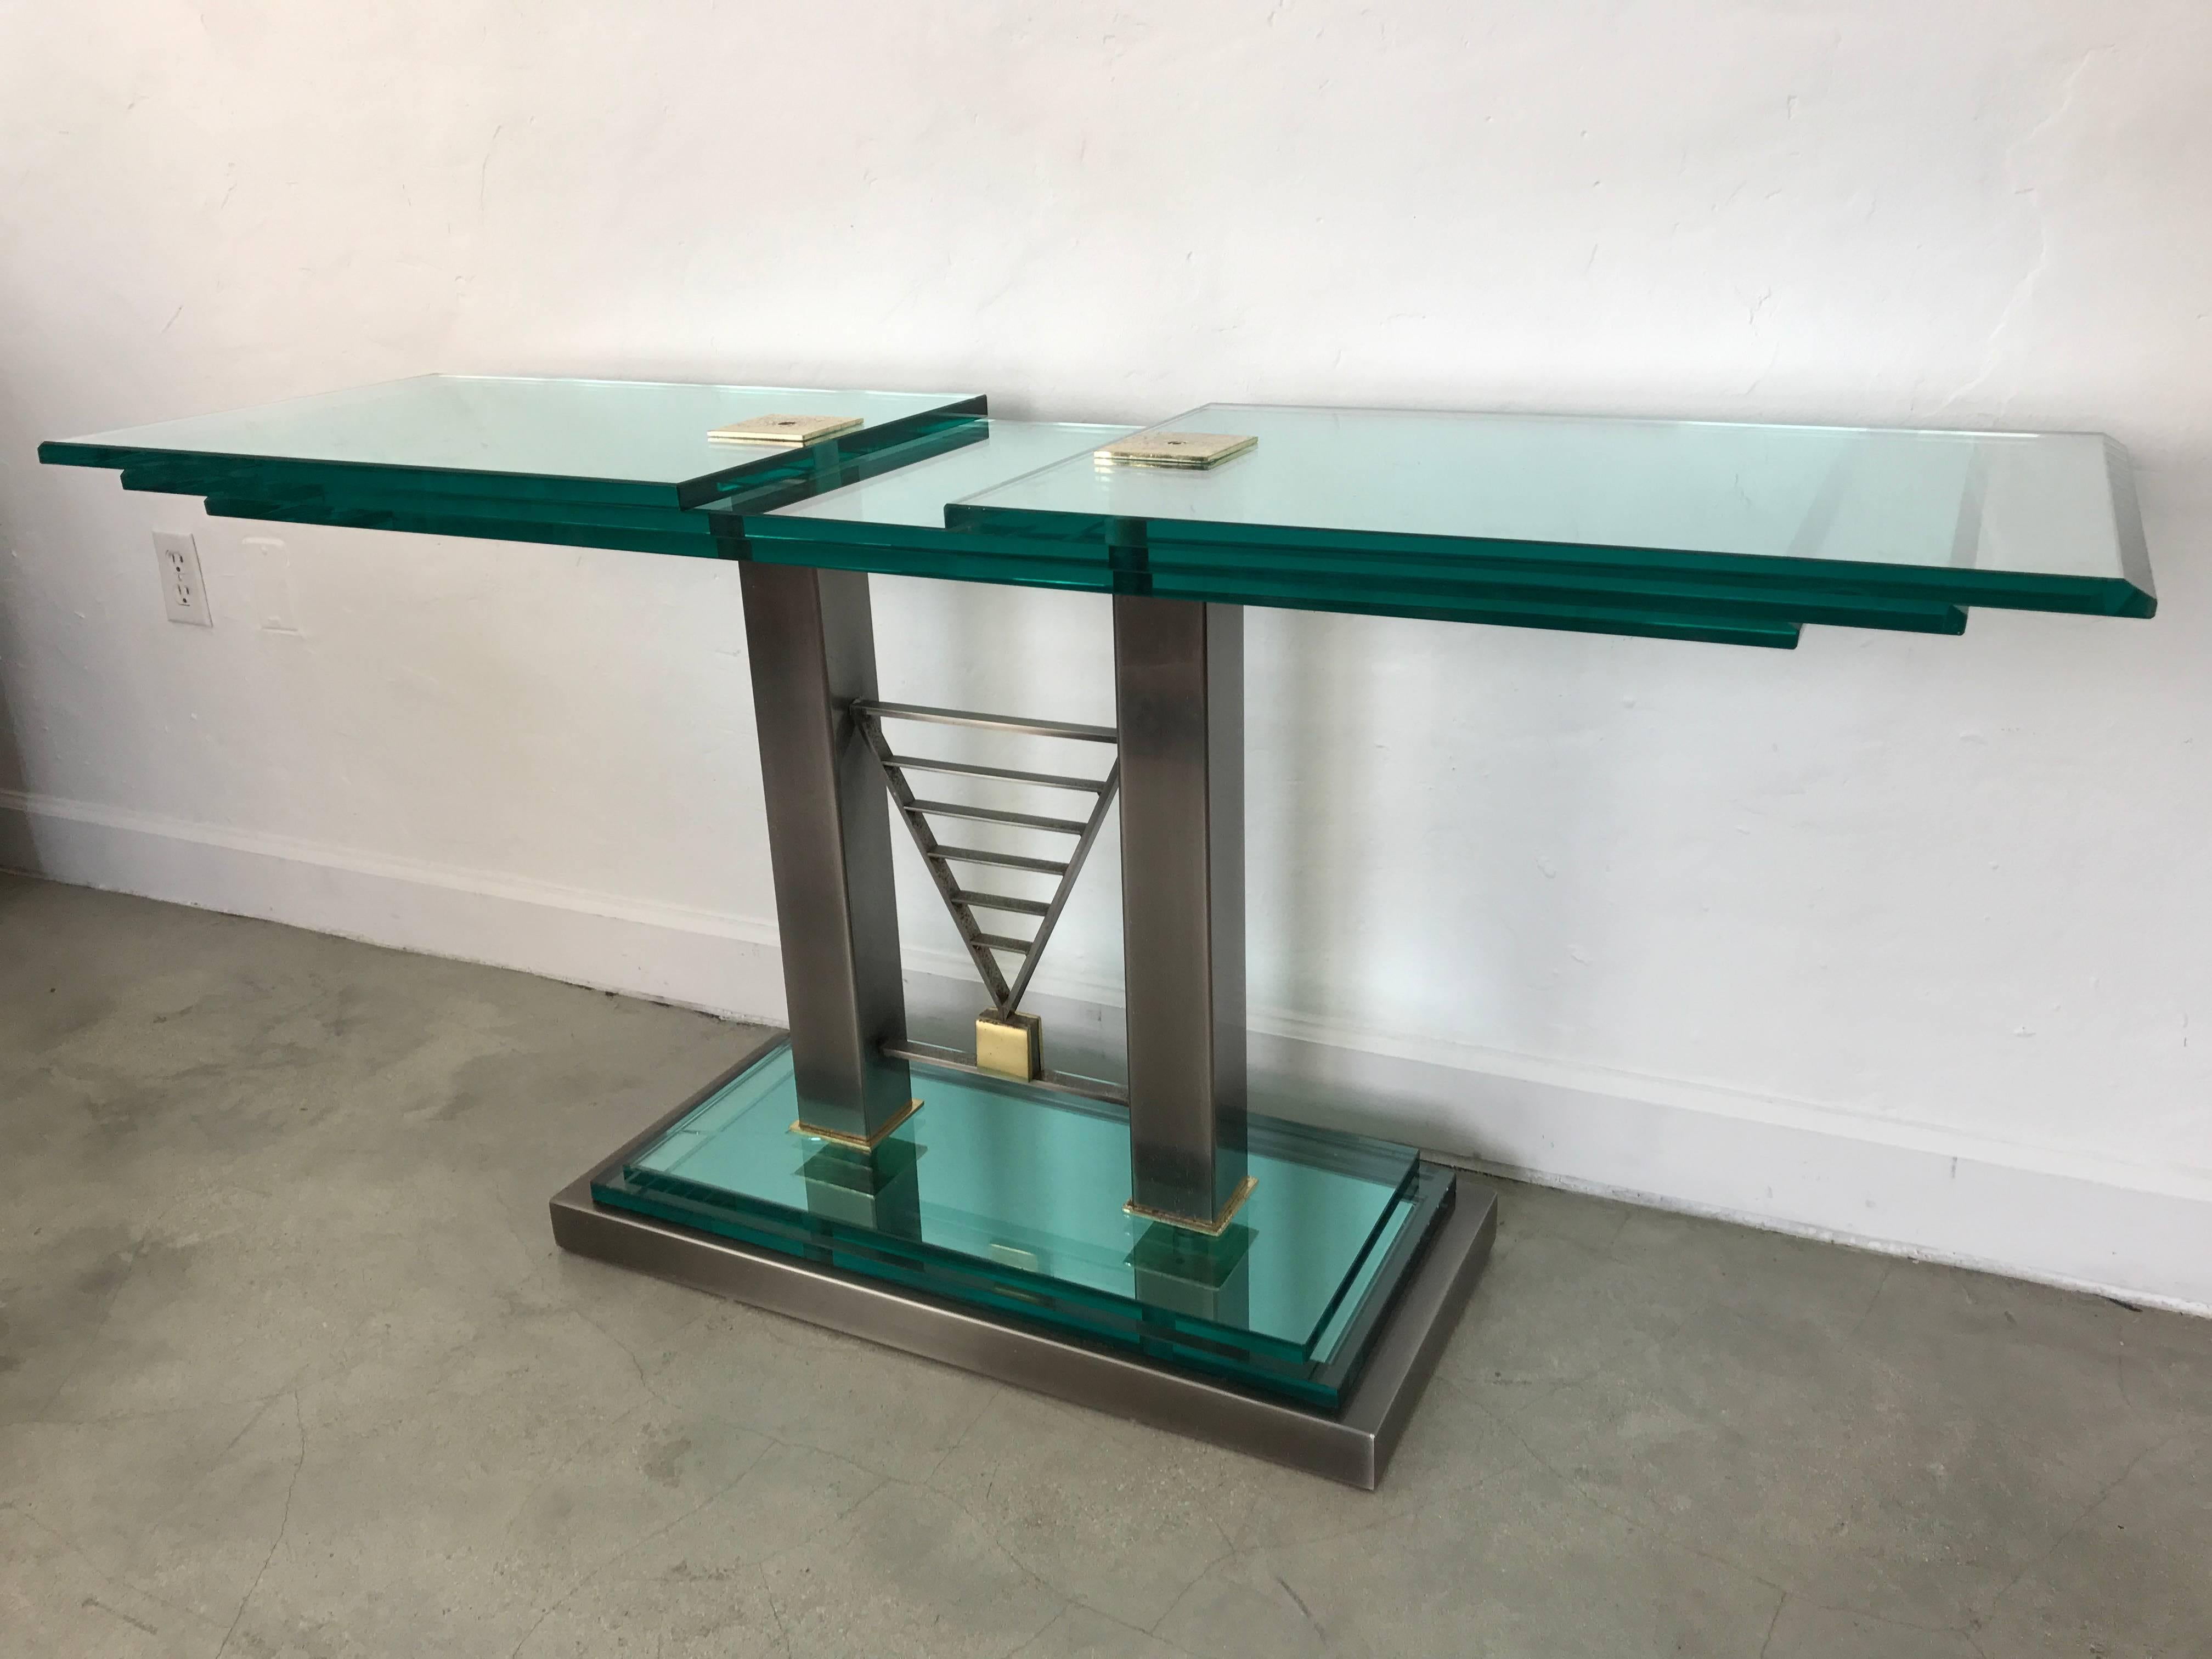 Original steel and bevelled glass Deco Revival console table with patinated brass hardware by Design Institute of America, 1986.